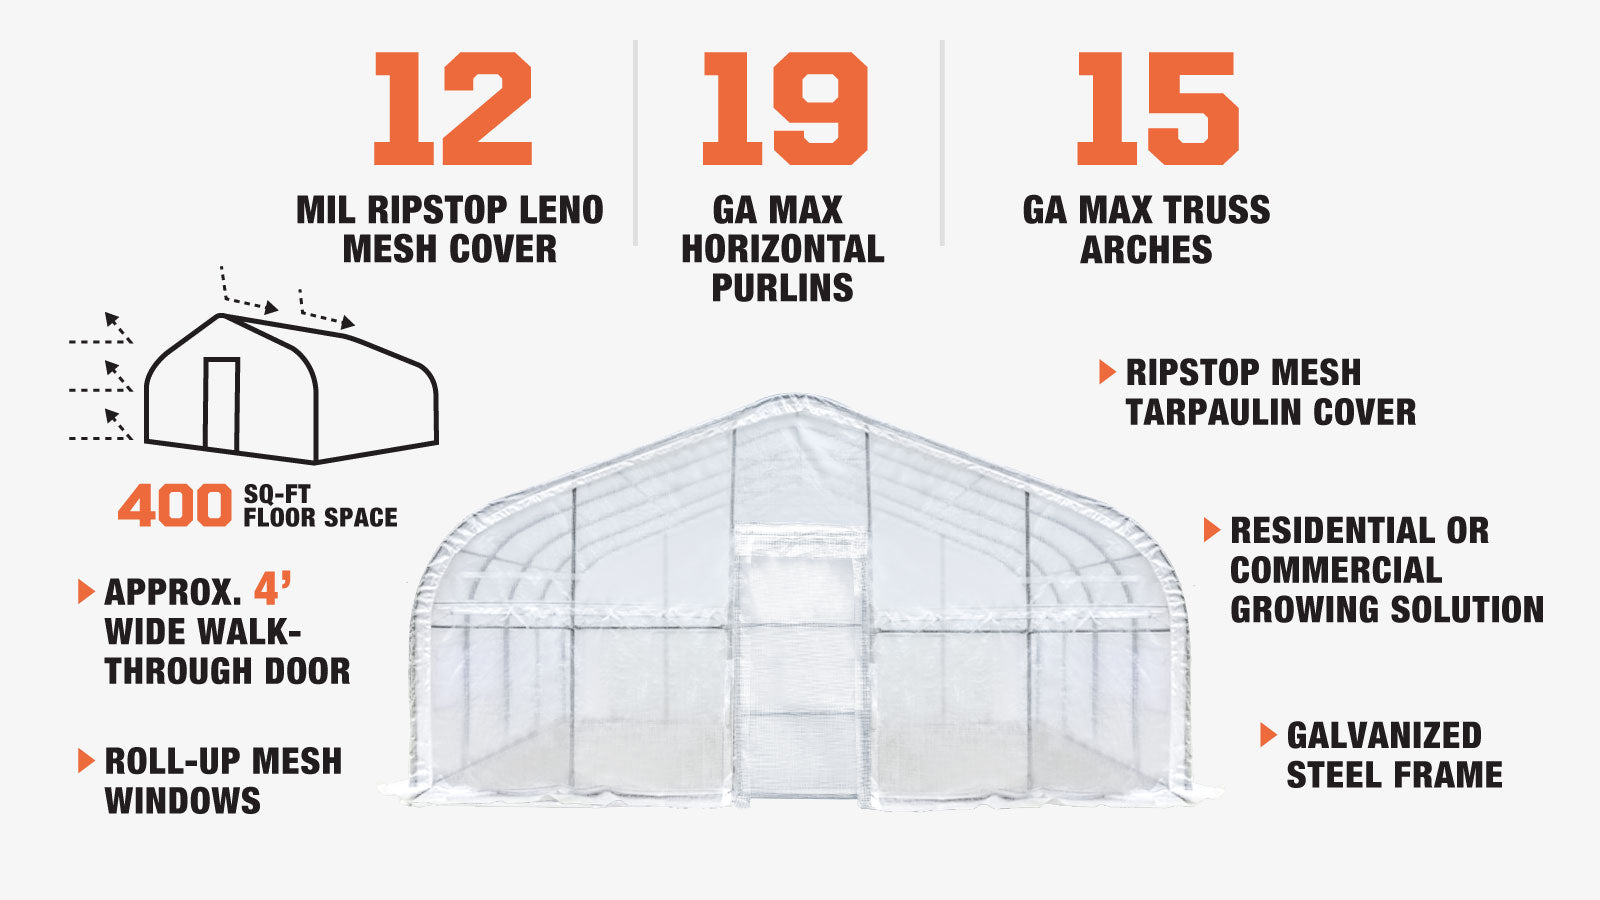 TMG Industrial 20' x 20' Tunnel Greenhouse Grow Tent with 12 Mil Ripstop Leno Mesh Cover, Cold Frame, Roll-up Windows, Peak Ceiling Roof, TMG-GH2020-description-image